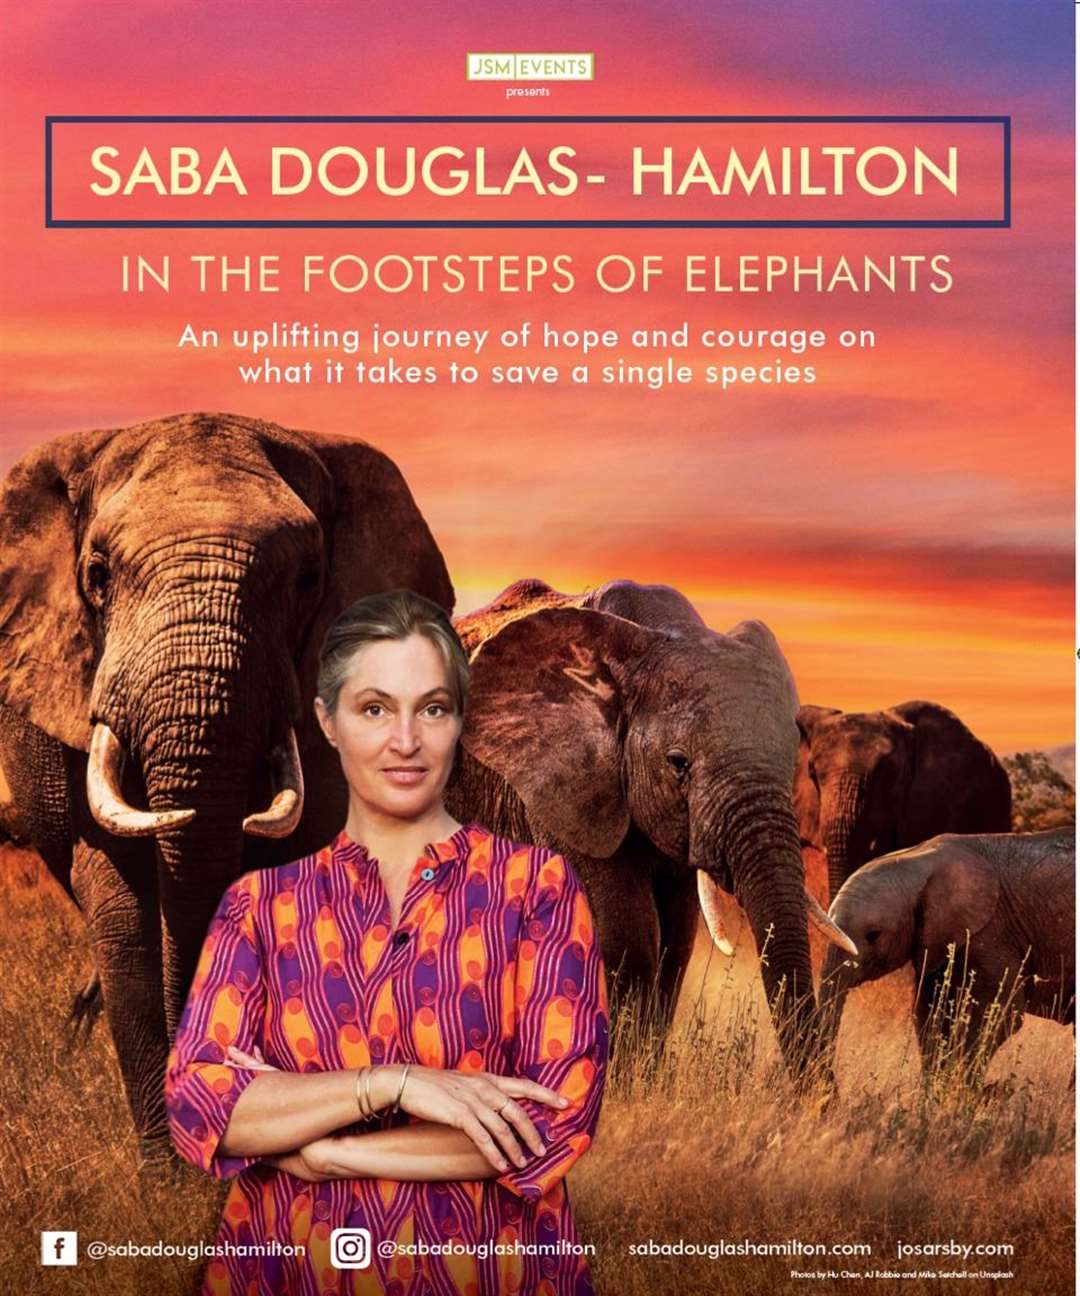 Saba Douglas-Hamilton returns to talk at Eden Court about her life In The Footsteps Of Elephants.